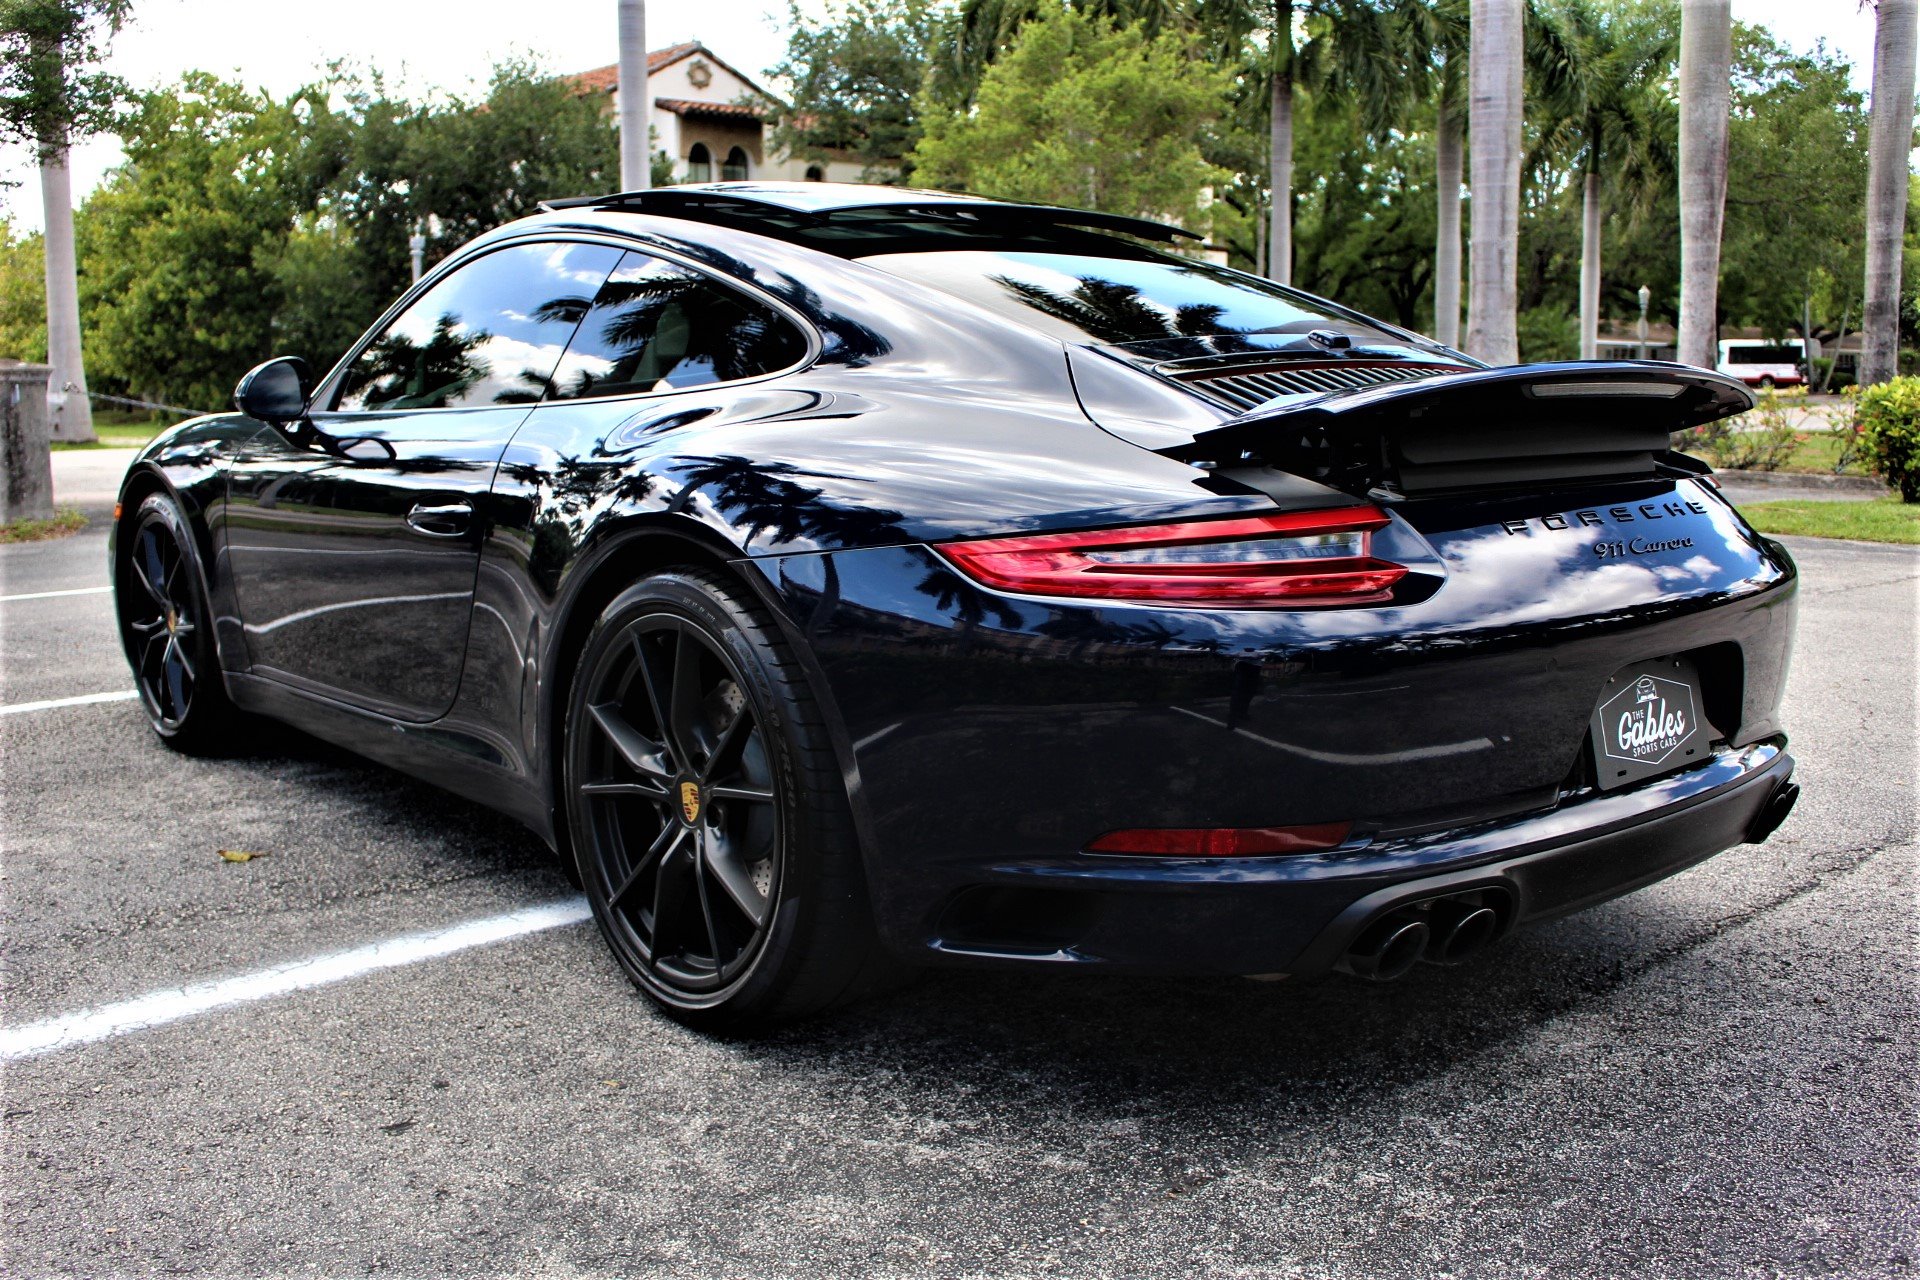 Used 2017 Porsche 911 Carrera for sale Sold at The Gables Sports Cars in Miami FL 33146 3